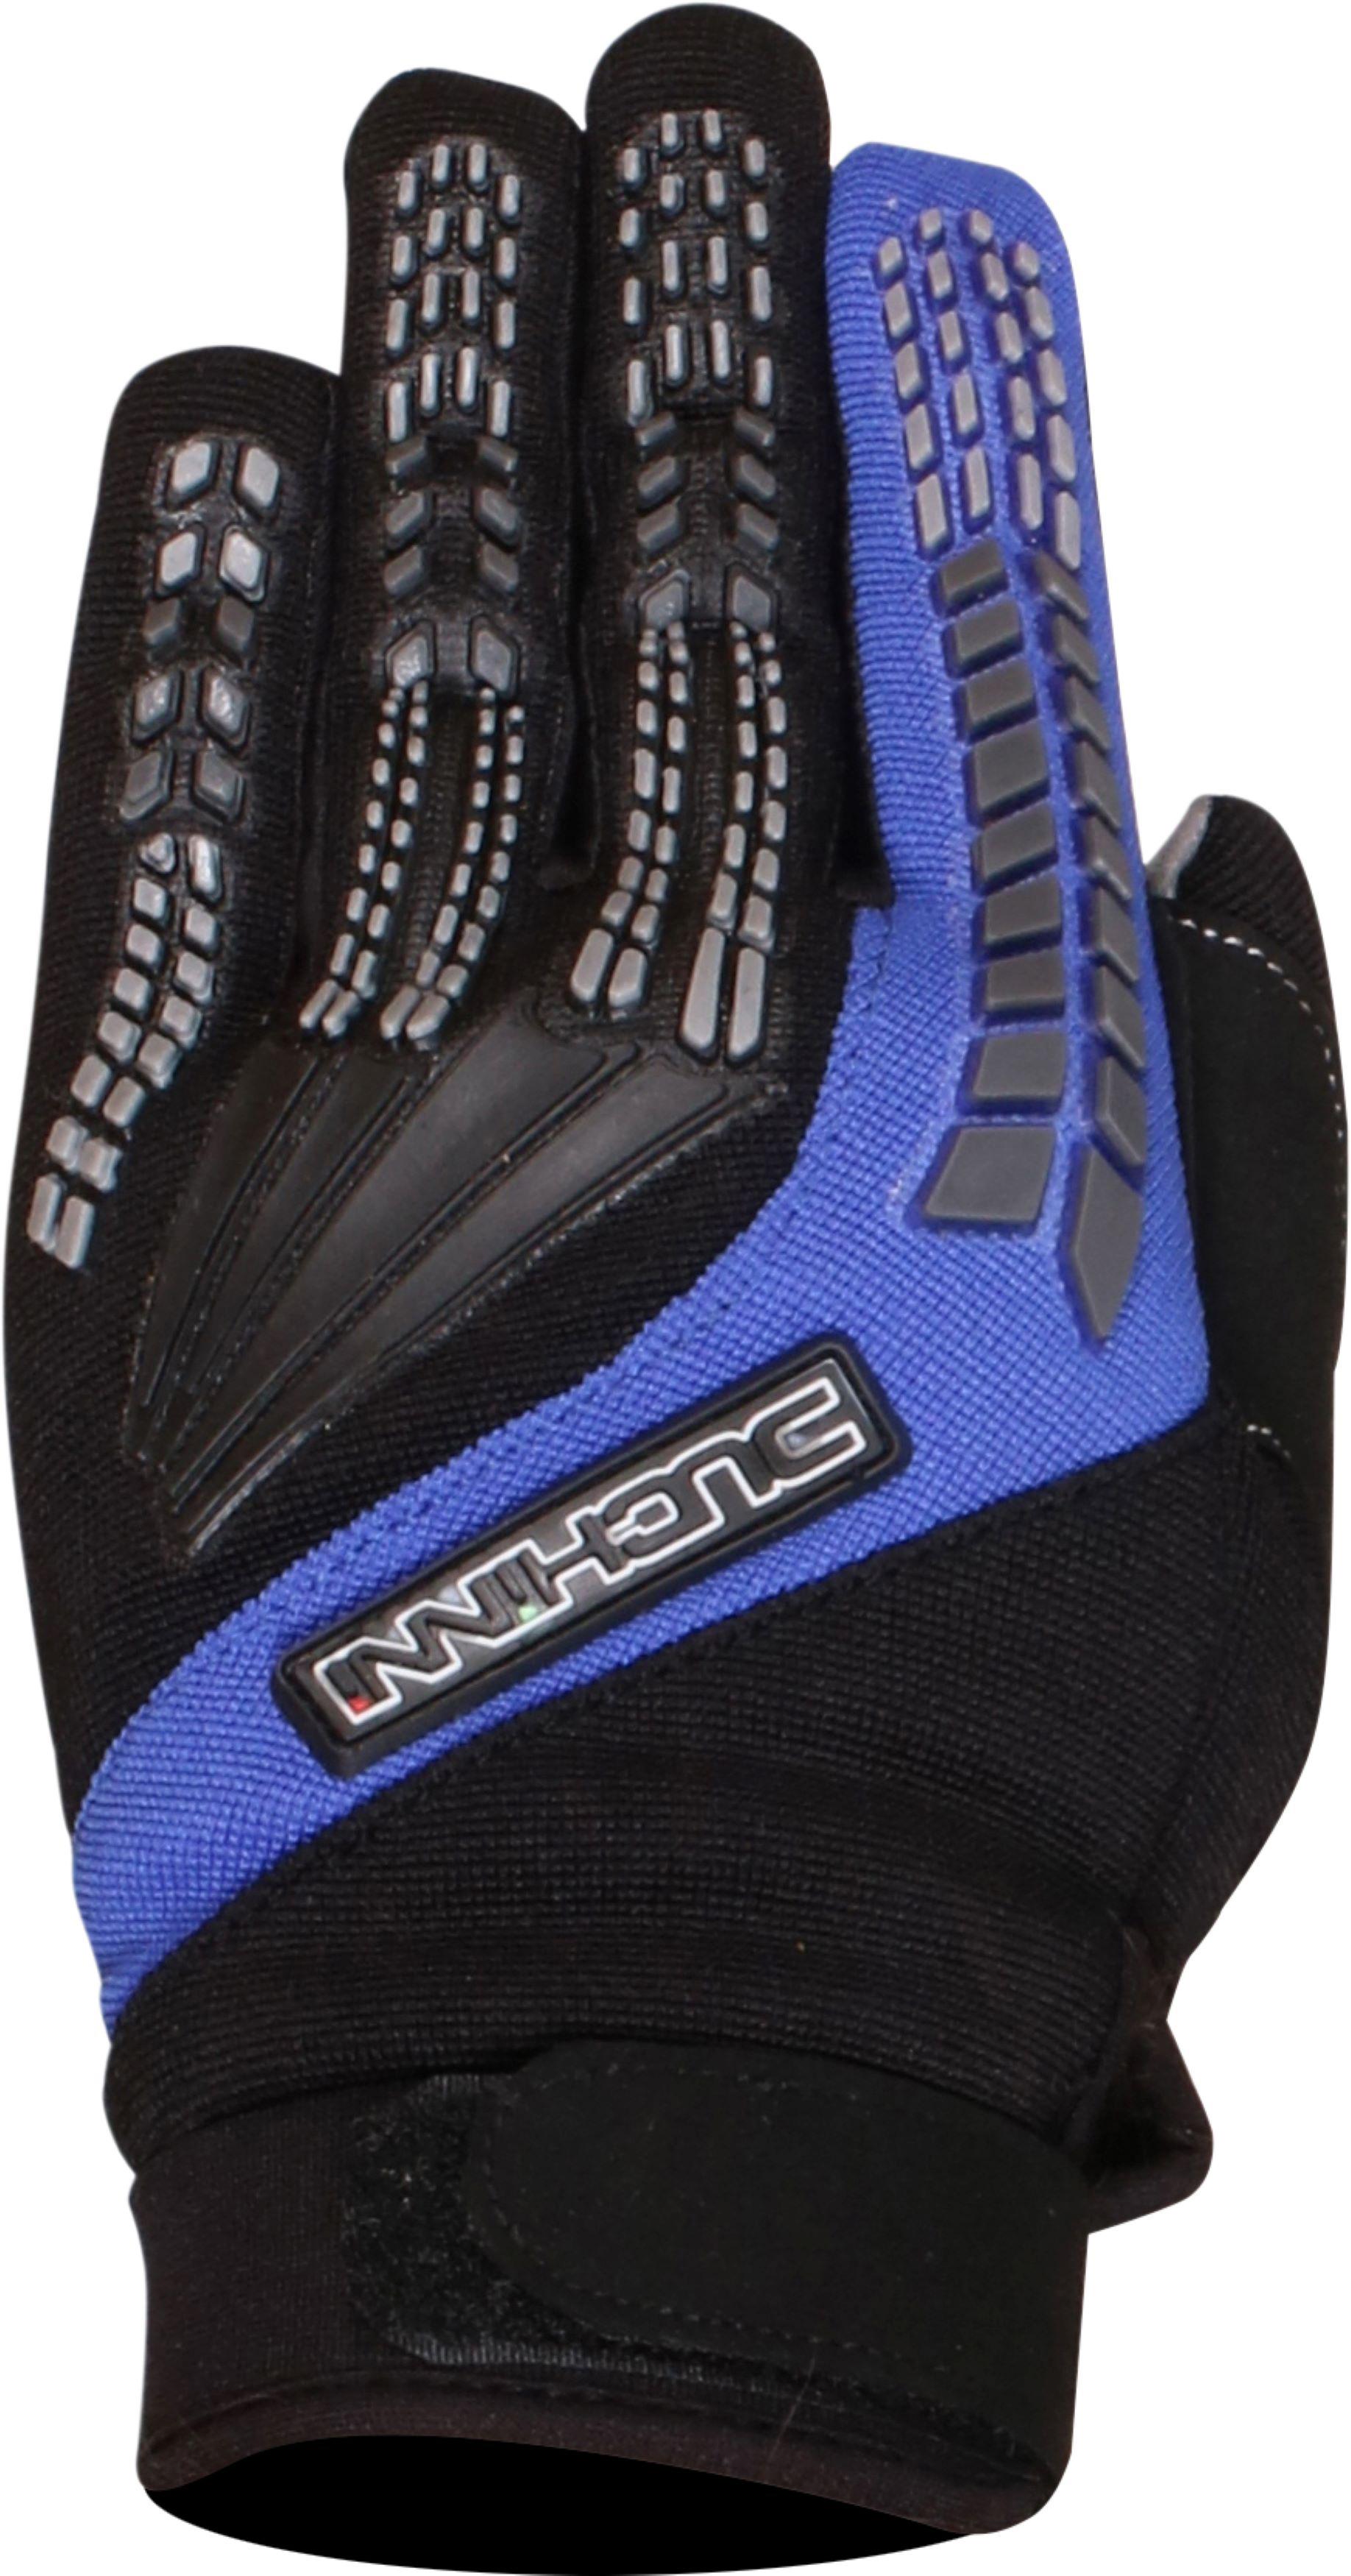 Duchinni Focus Motorcycle Gloves - Black And Blue, L